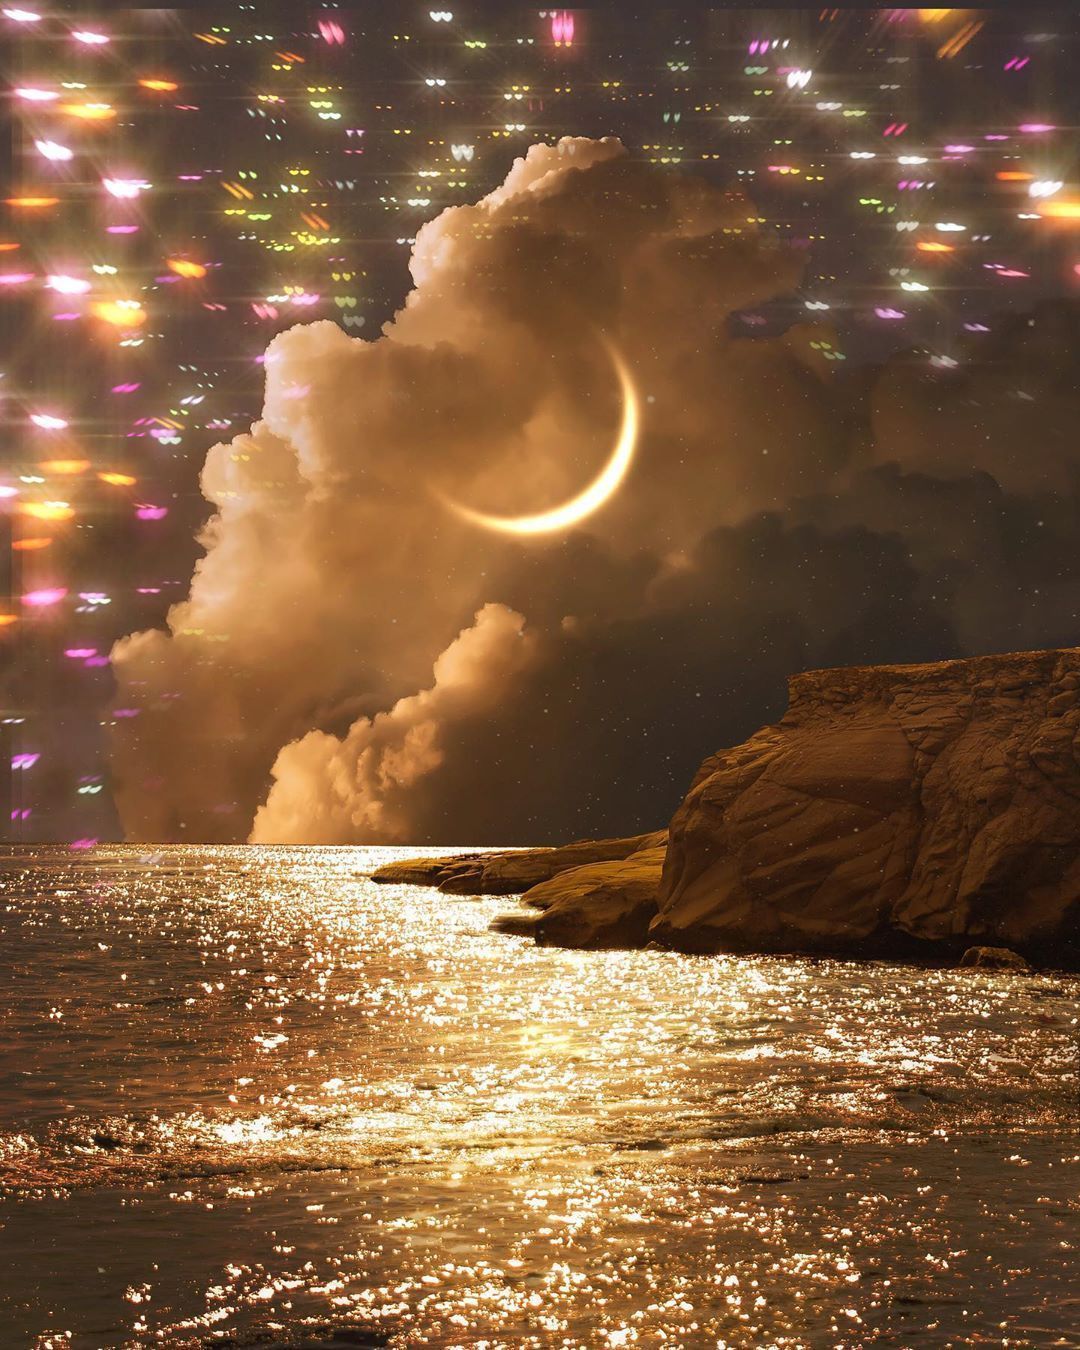 This is a photo of a crescent moon and a cloud above a body of water. - Bling